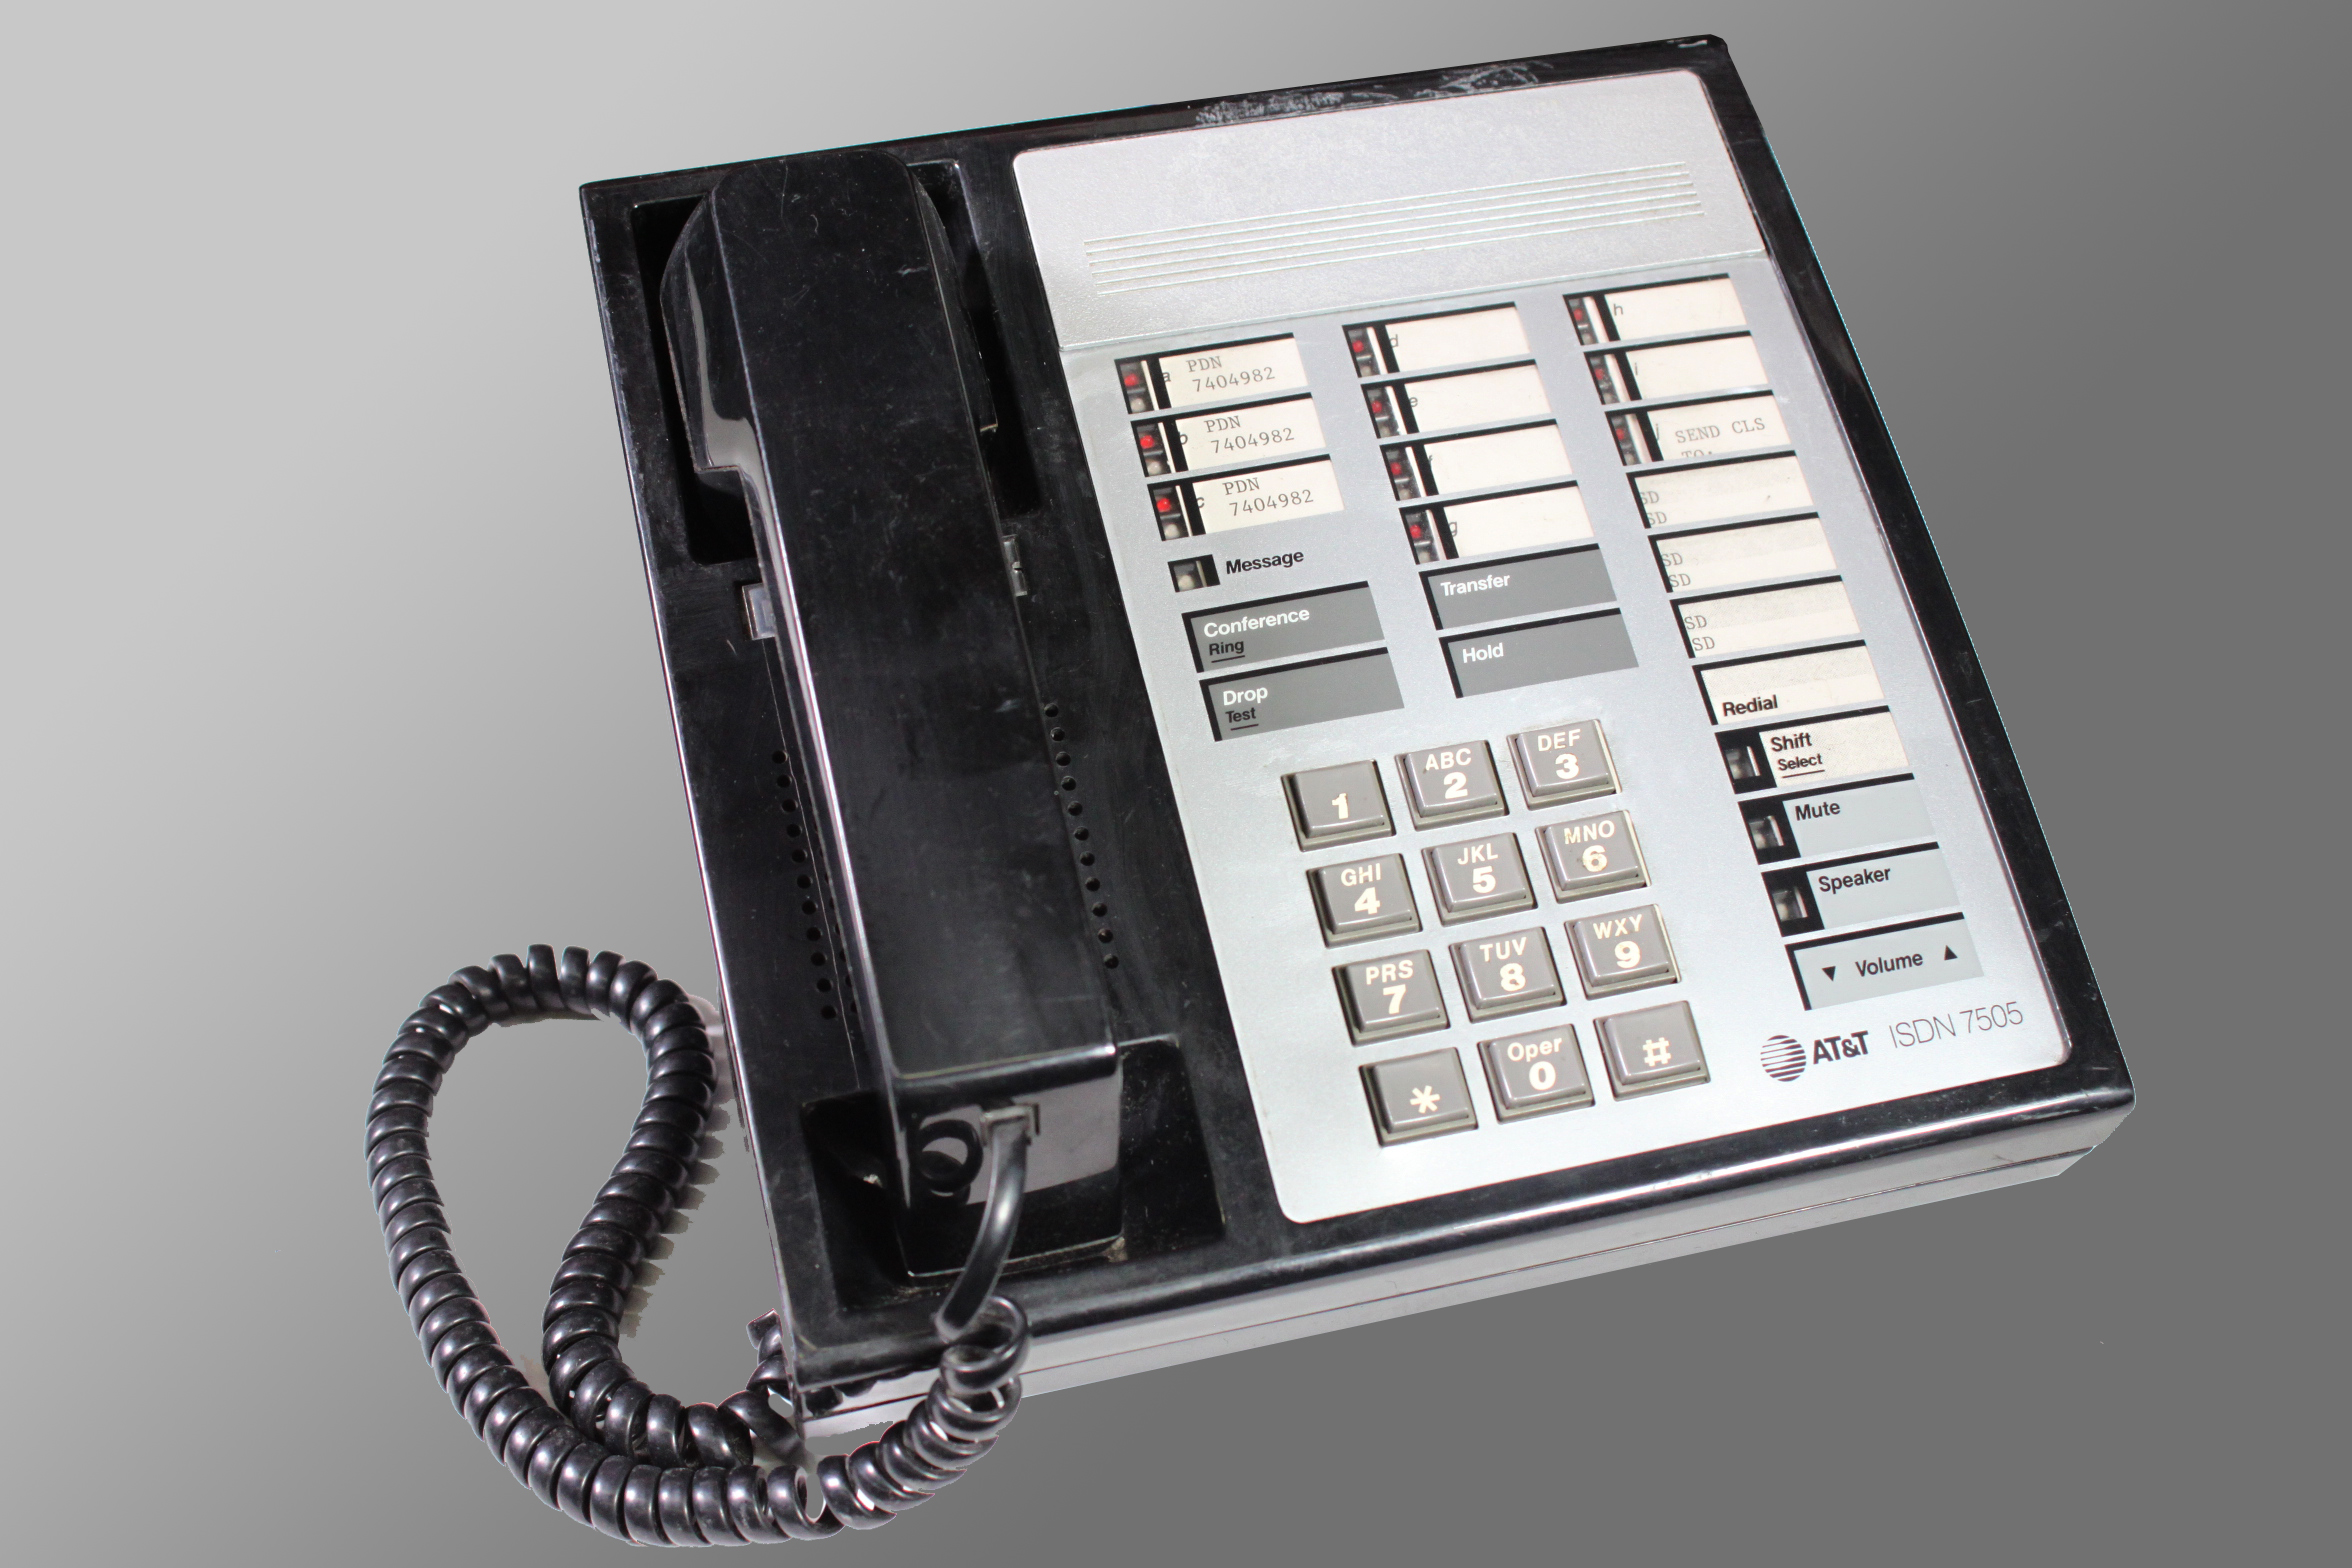 AT&T Office Phones